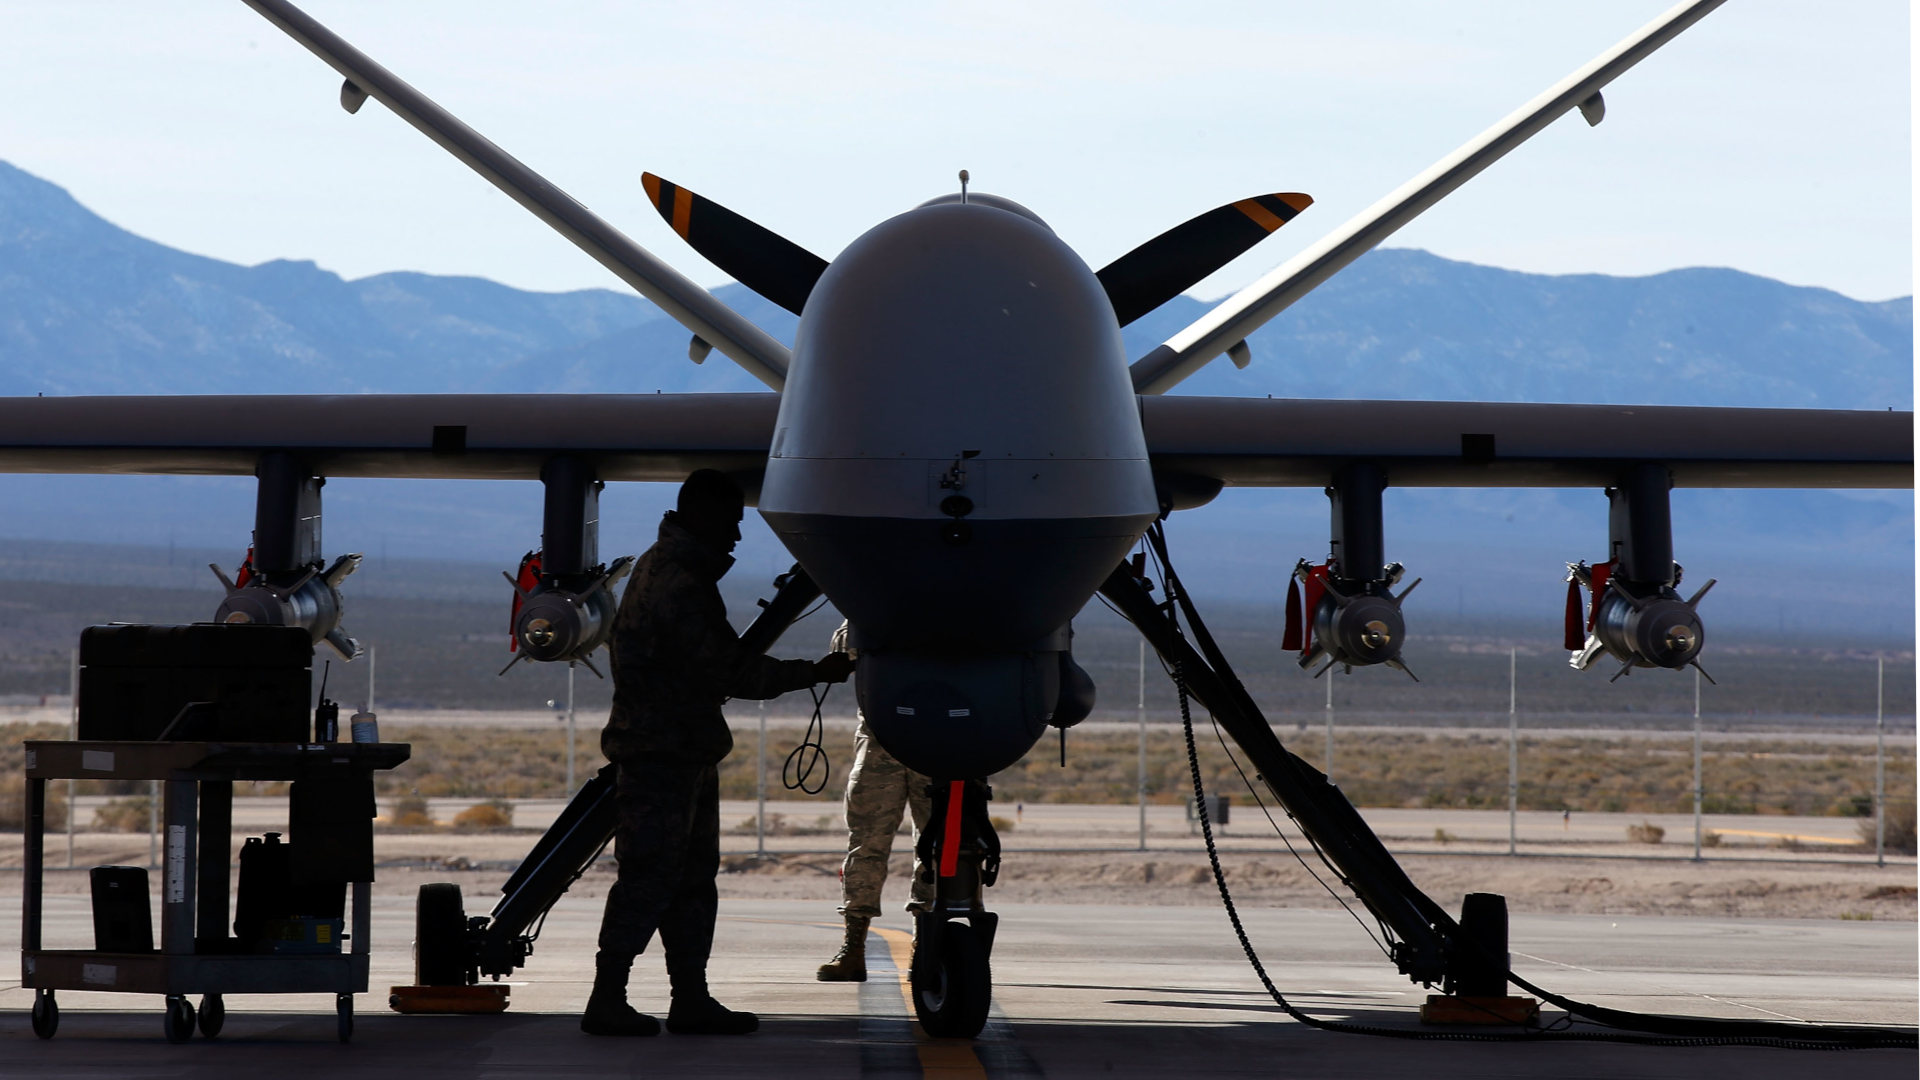 An MQ-9 Reaper remotely piloted aircraft, which can also operate autonomously, is prepared for training mission at Creech Air Force Base on November 17, 2015 in Indian Springs, Nevada.